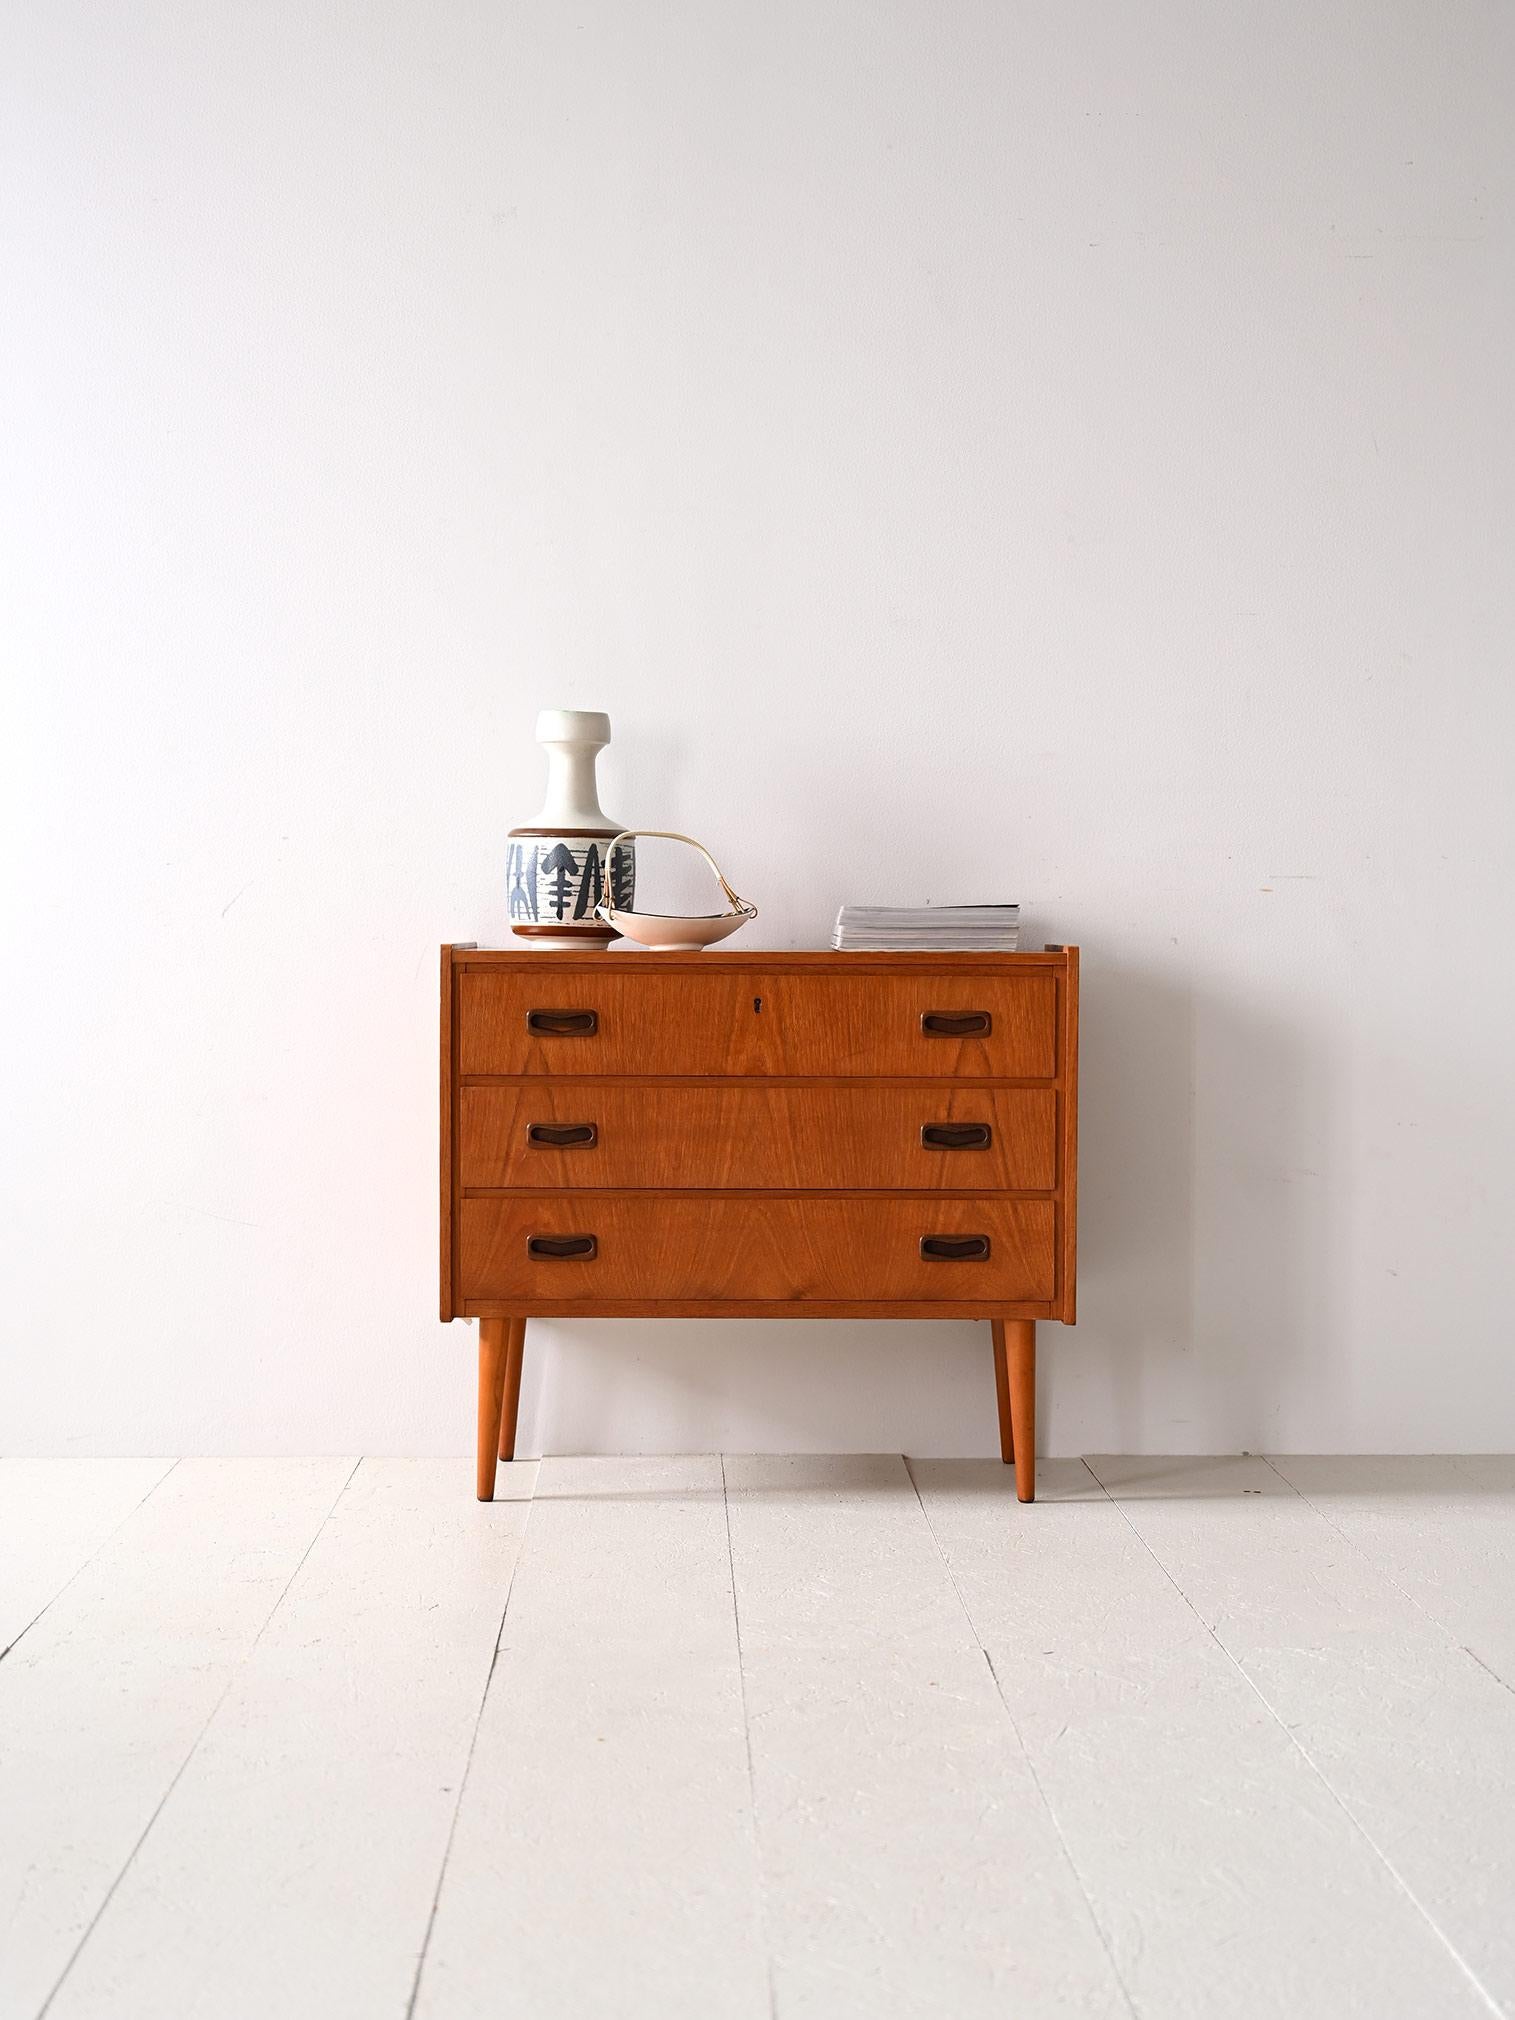 Vintage 1960s cabinet with drawers.

Simple, linear forms for this chest of drawers in warm teak wood tones. 
This mid-century vintage furniture piece features 3 drawers, the first of which has a lock. The distinctive handle carved in wood features